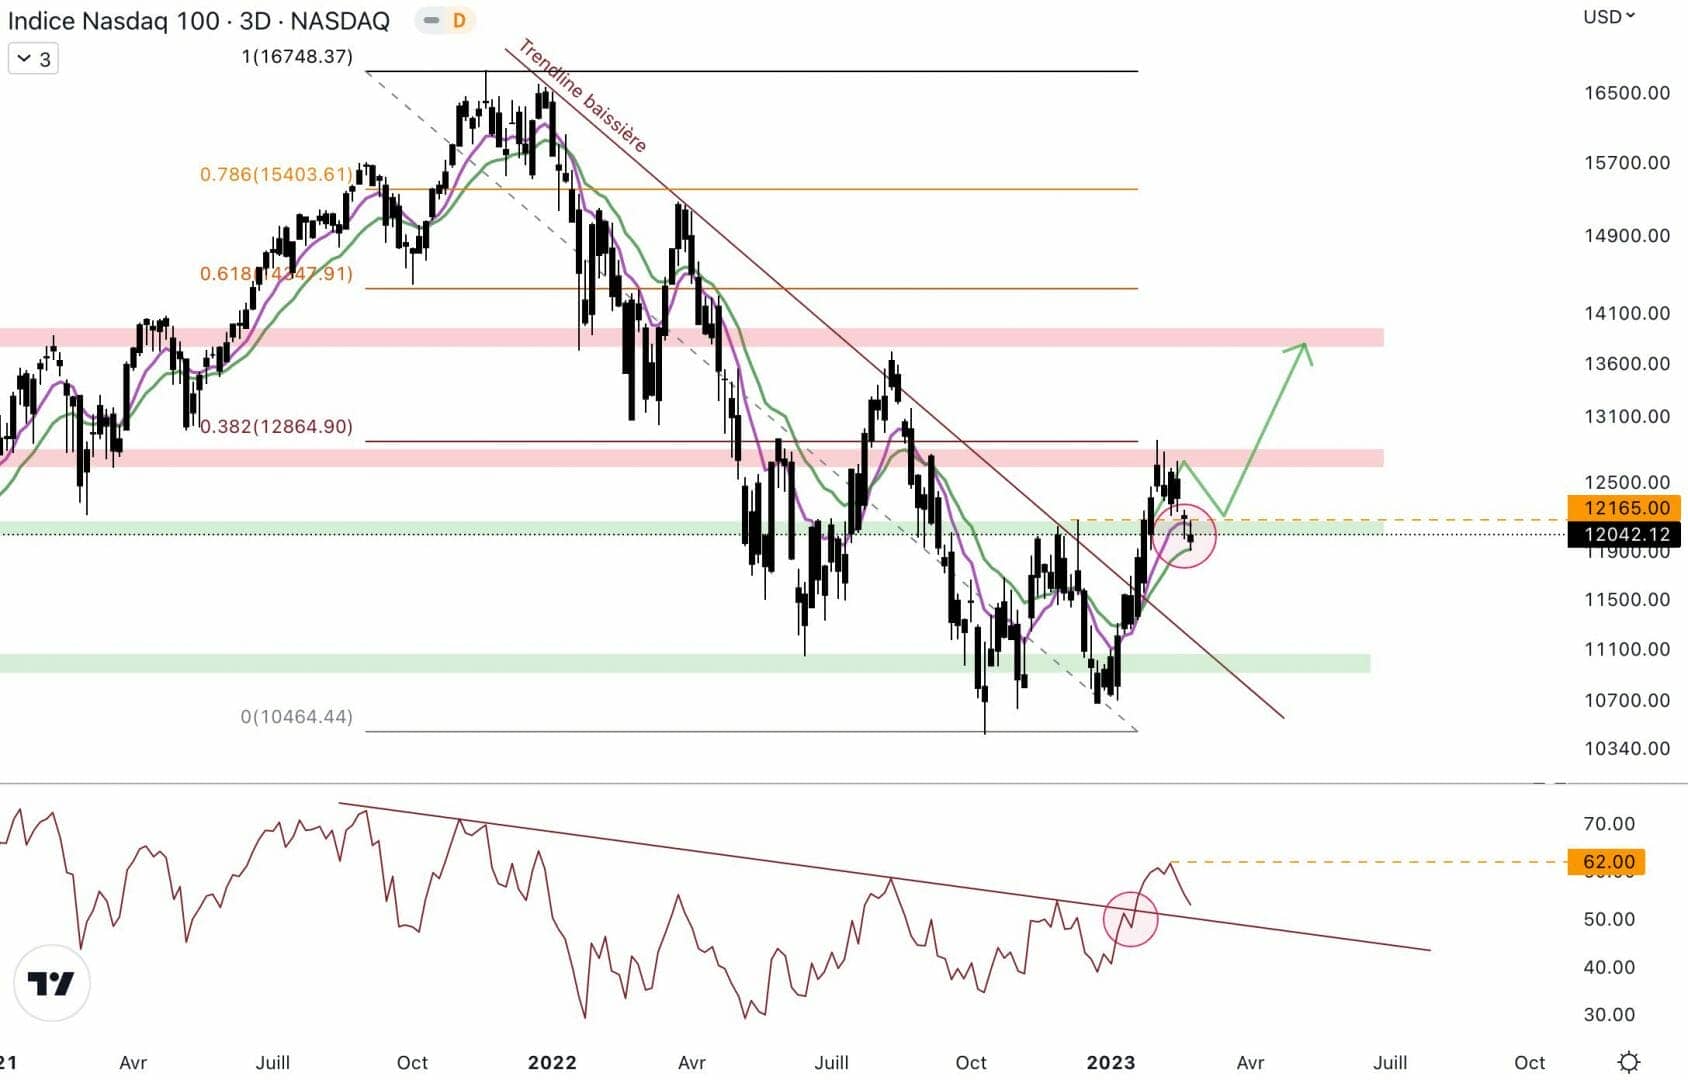 NASDAQ may bounce off support at $12,000 - March 1, 2023